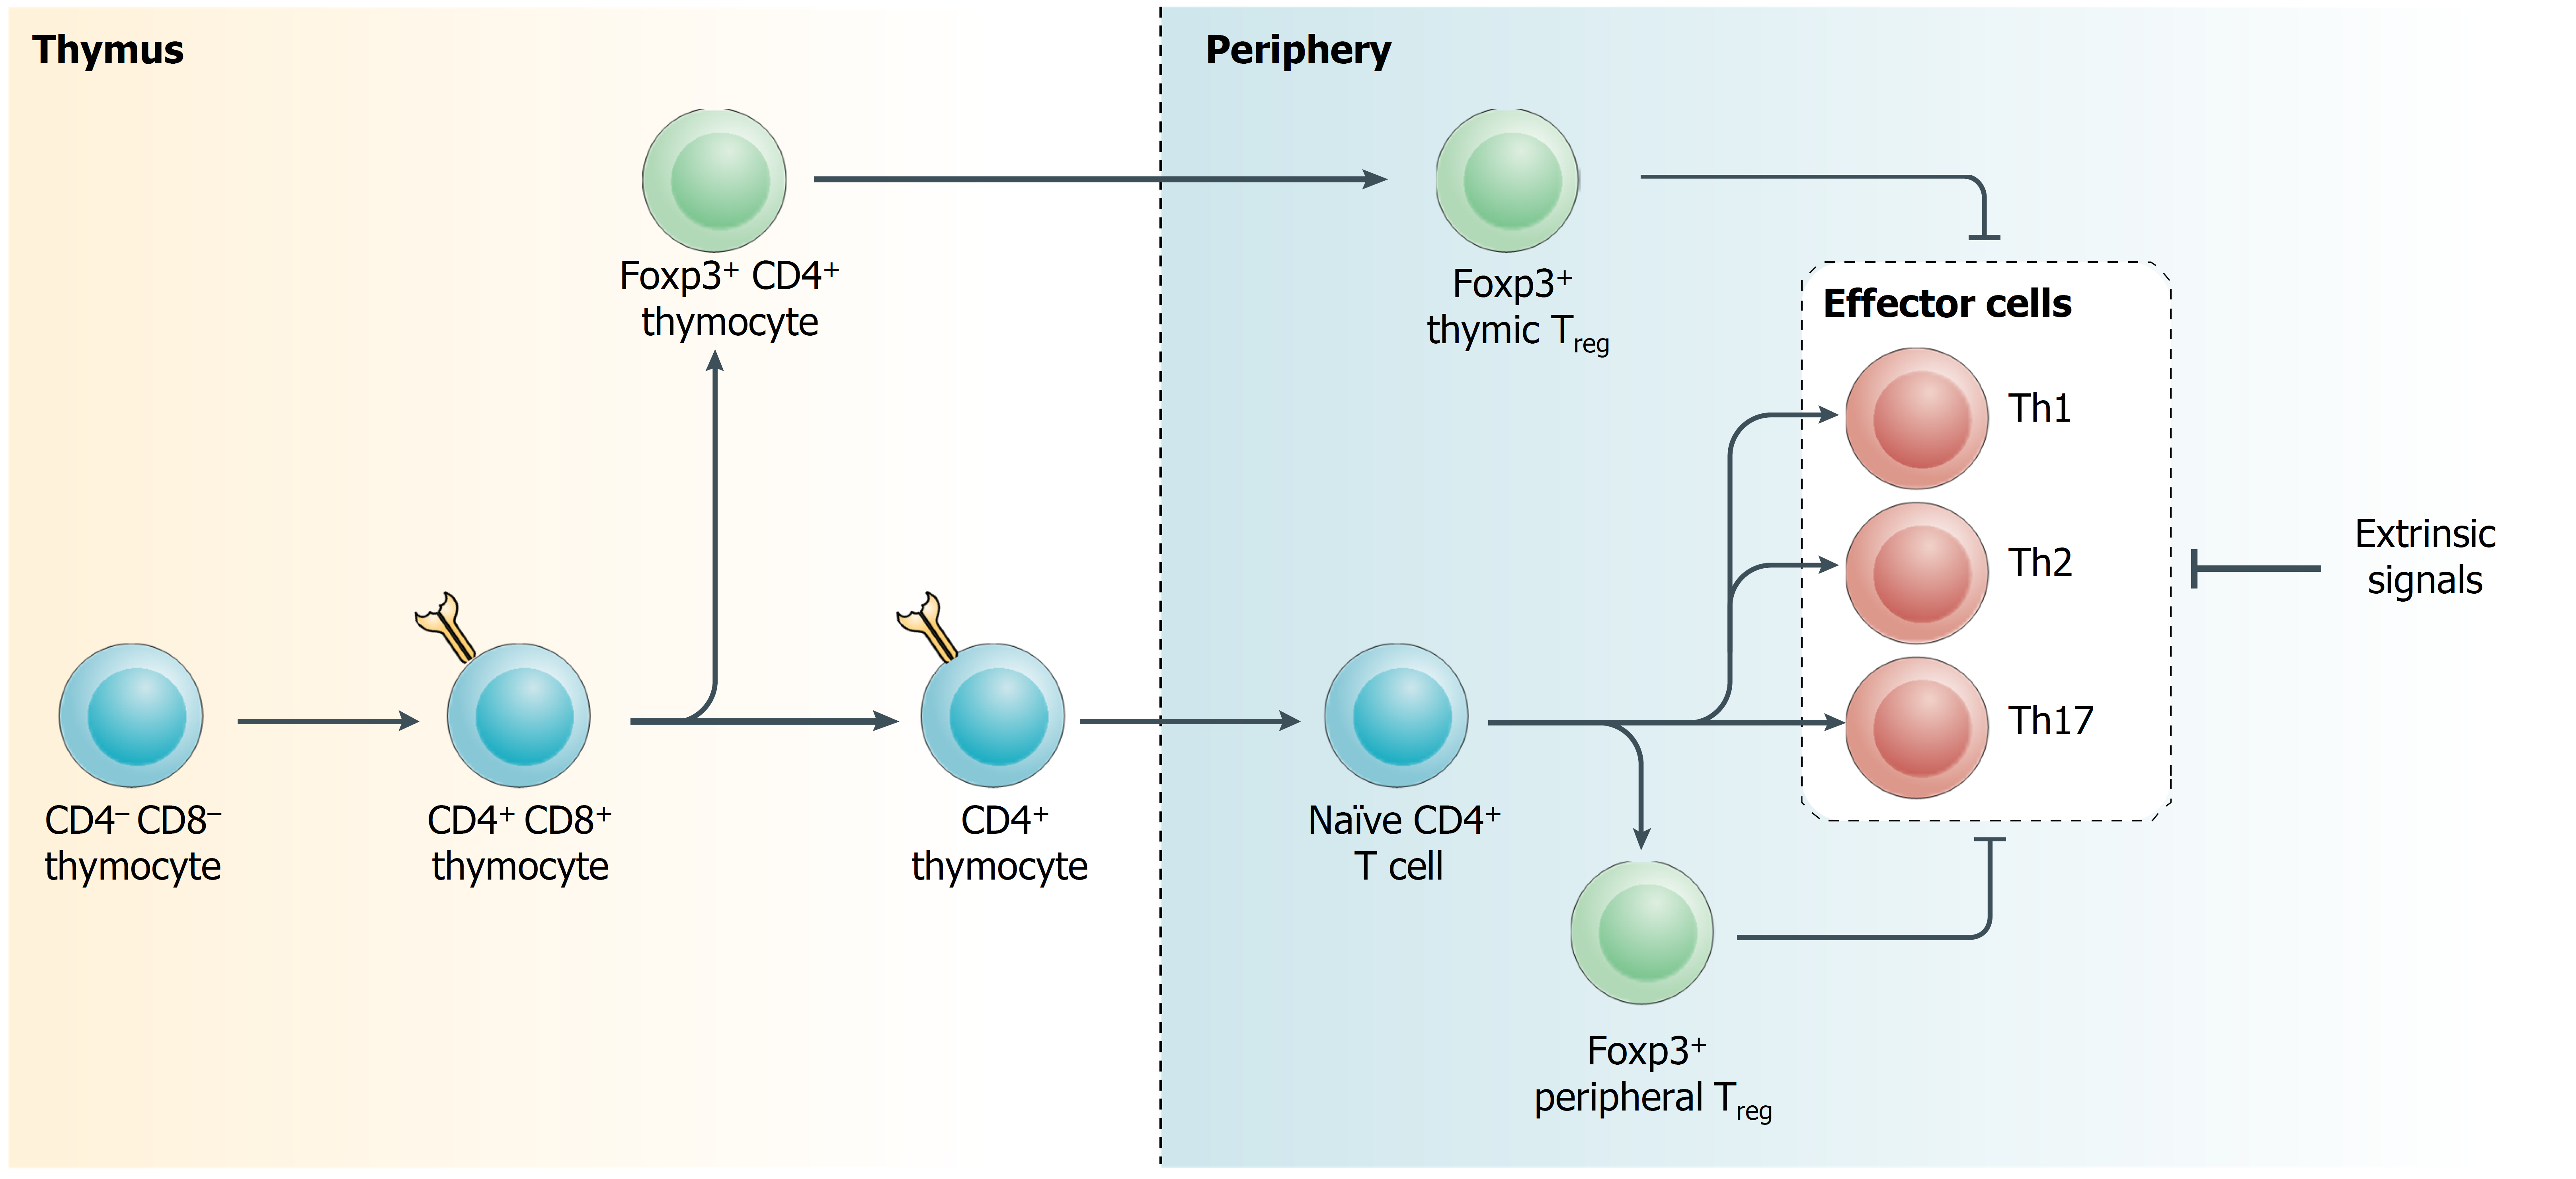 Immunoregulatory function within the T cell lineage.